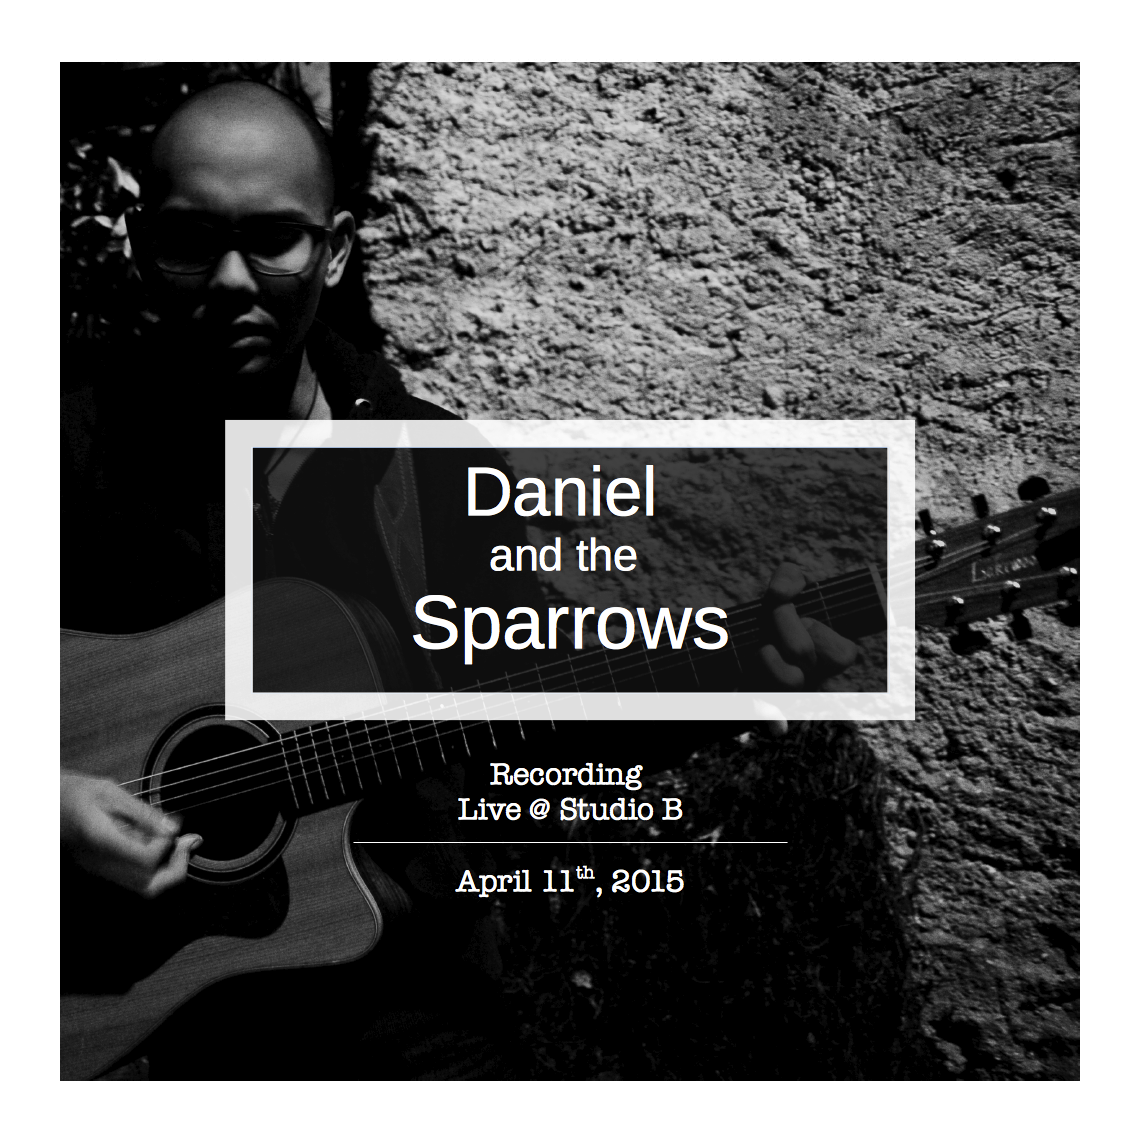 DAniel and the Sparrows2